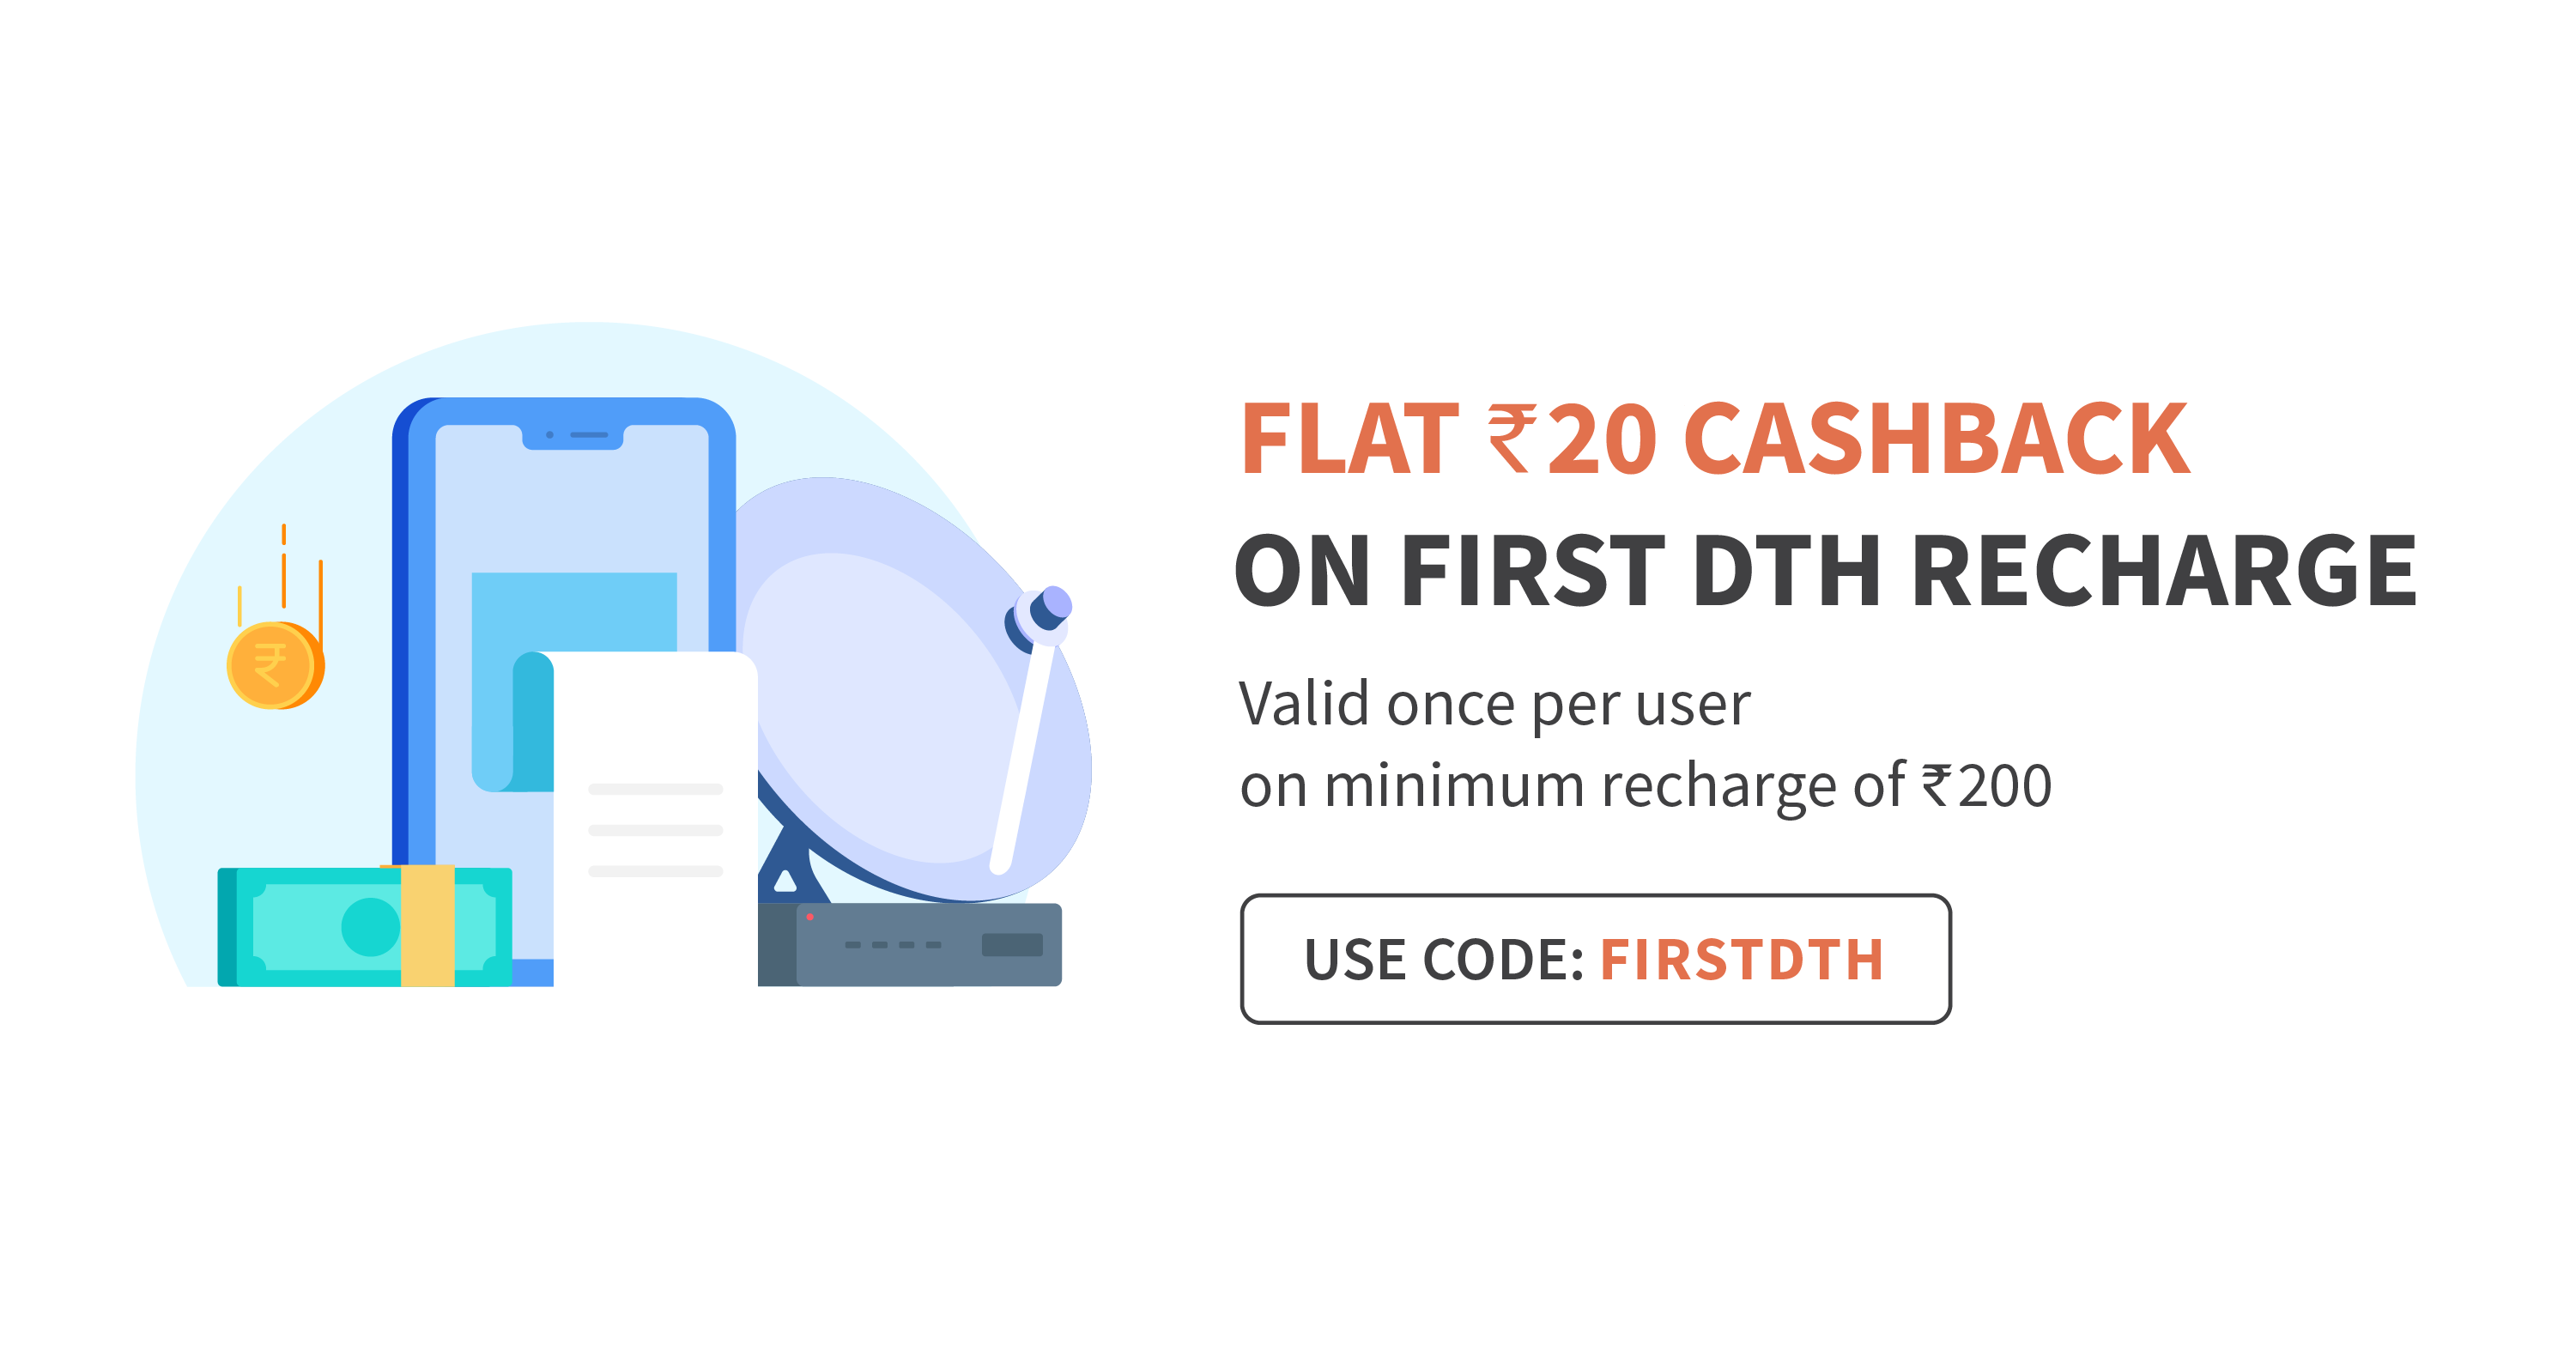 Flat Rs.20 cashback on DTH Recharge